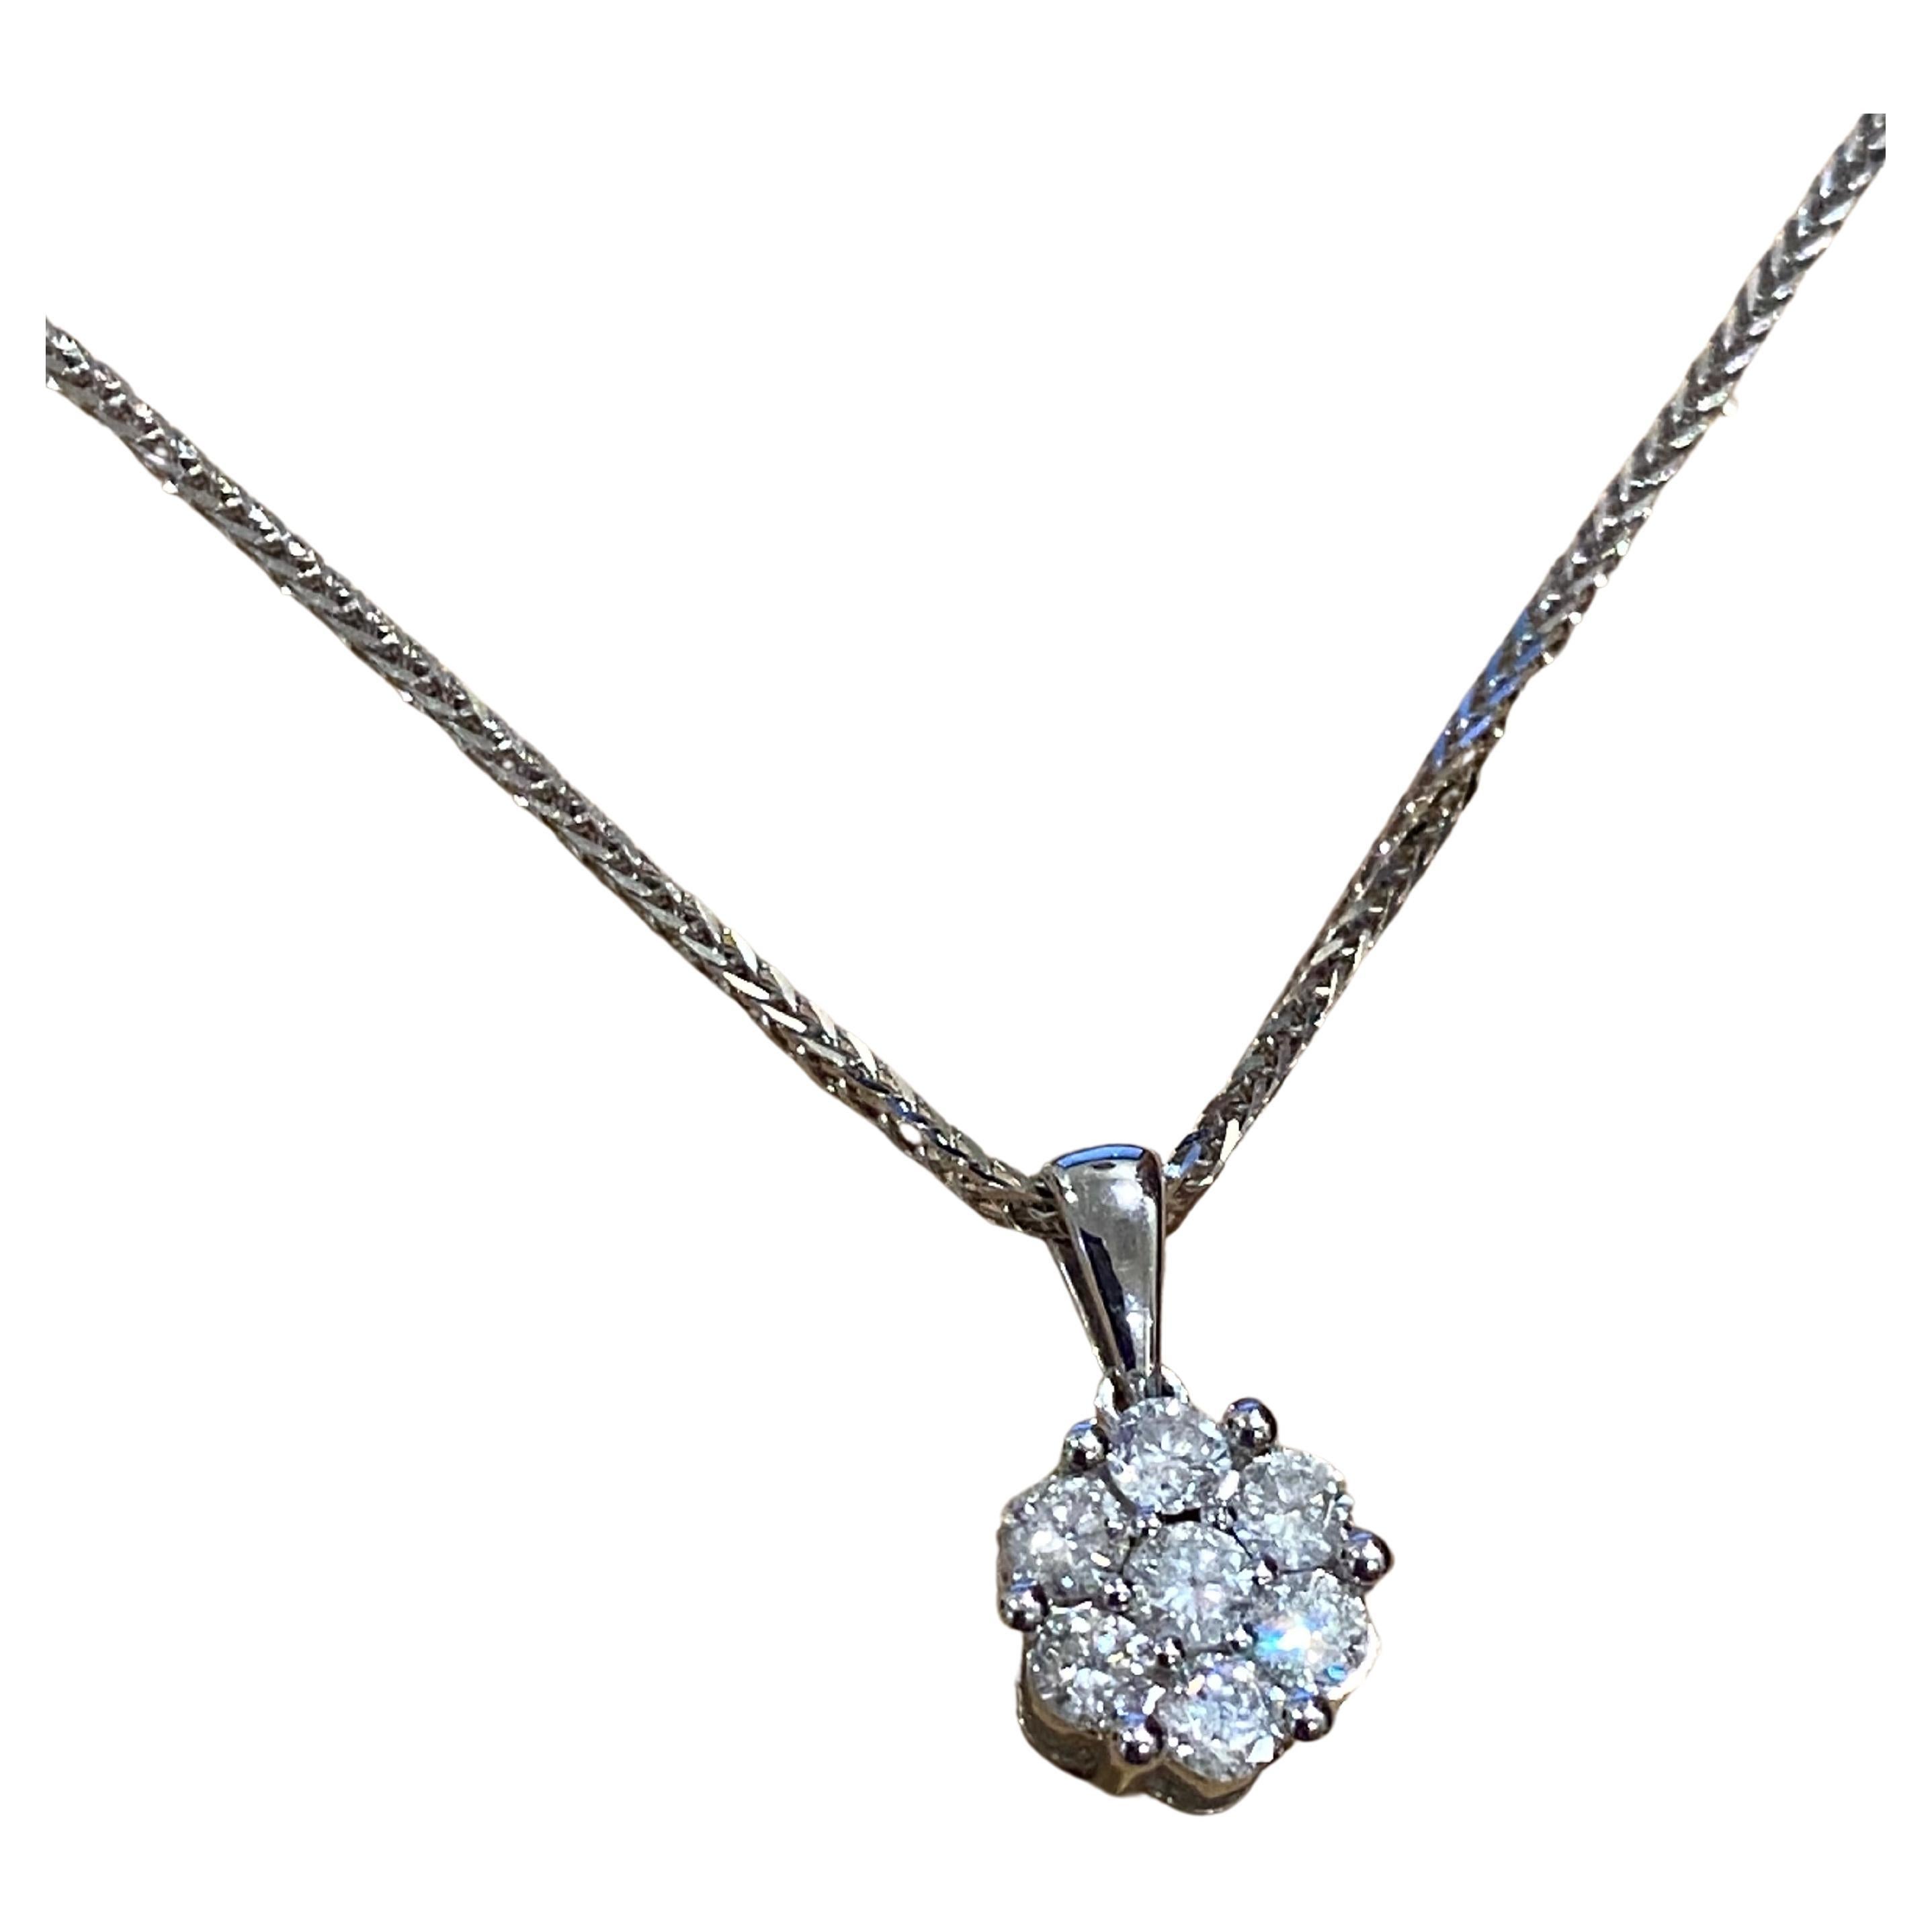 1.10ct Diamond Cluster Daisy Shaped Pendant in 18K White Gold on 18K Gold Chain